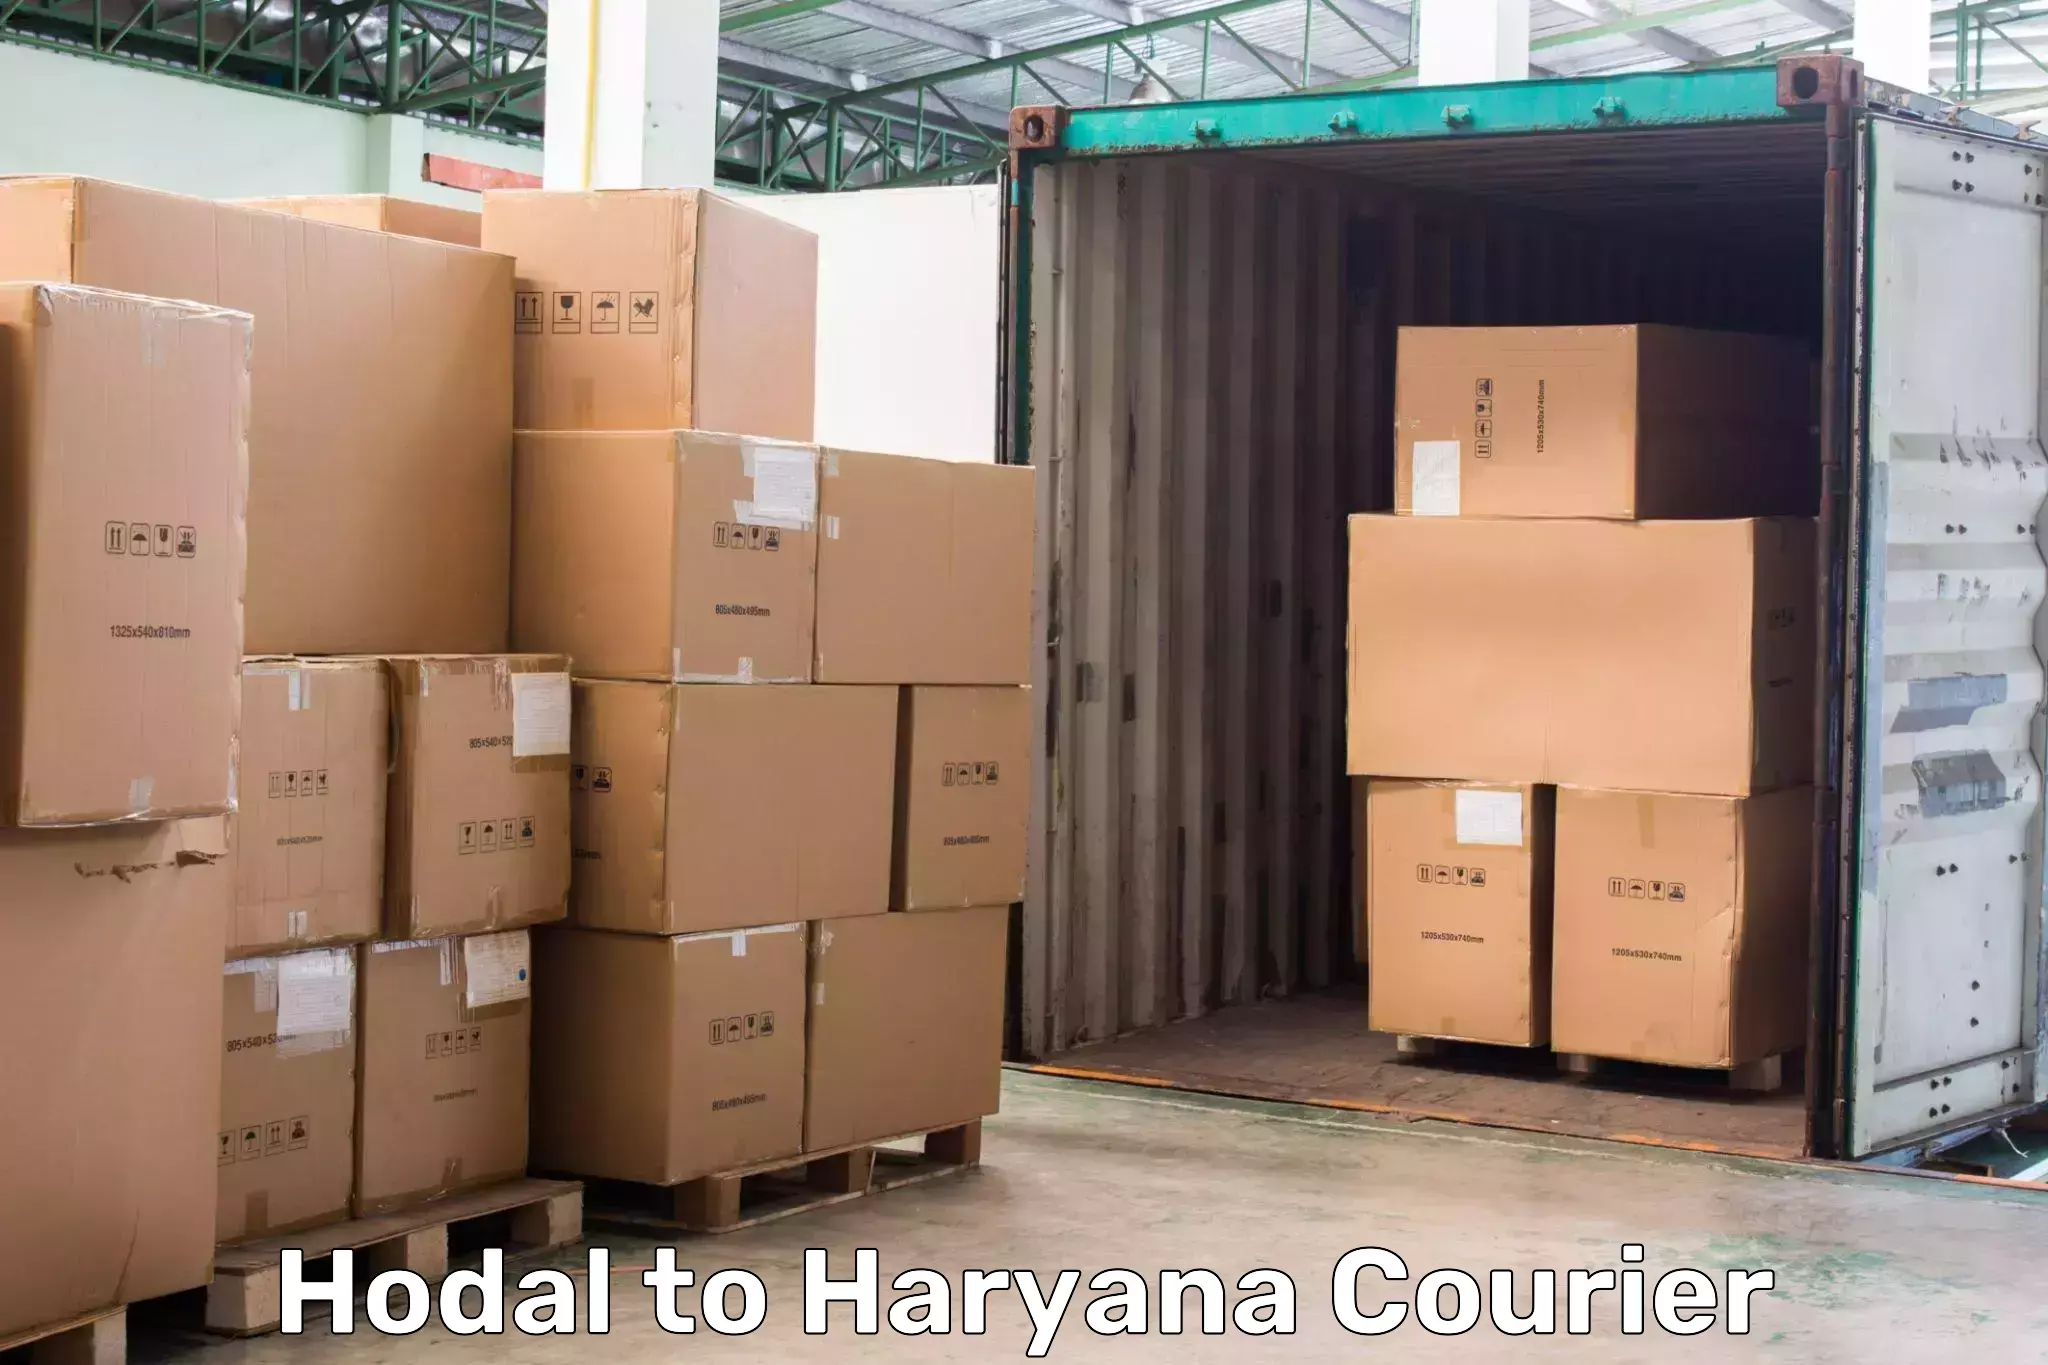 Reliable courier service Hodal to Chaudhary Charan Singh Haryana Agricultural University Hisar